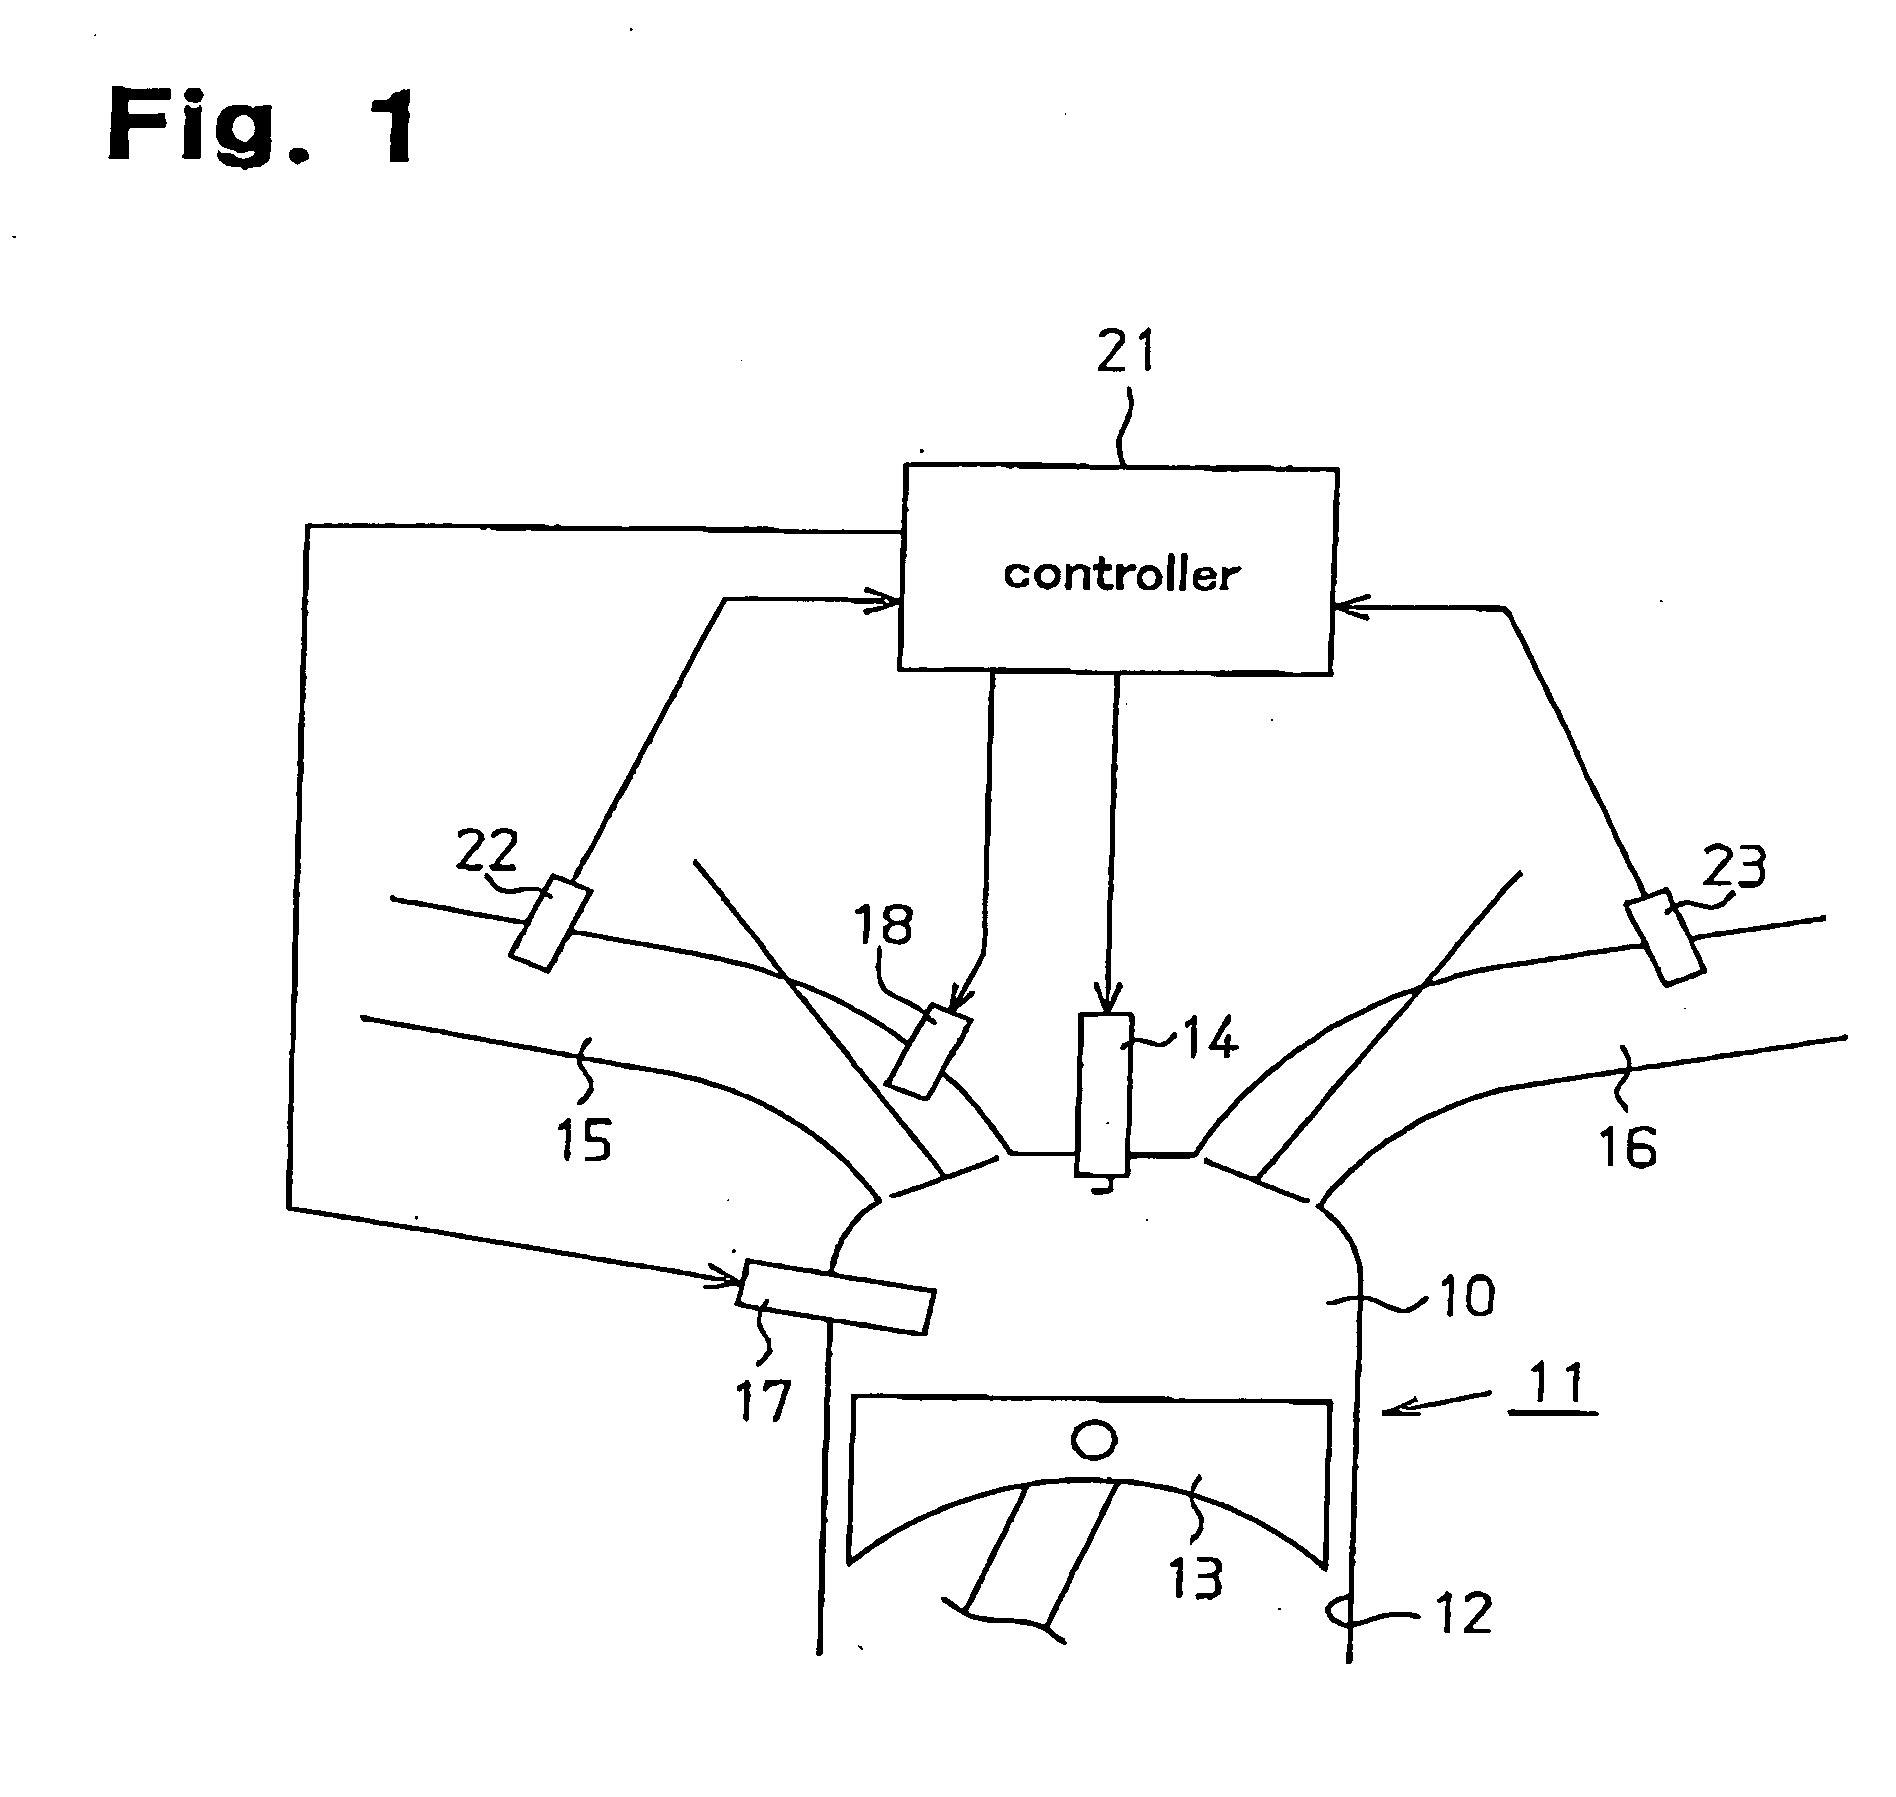 Engine fuel injection control system